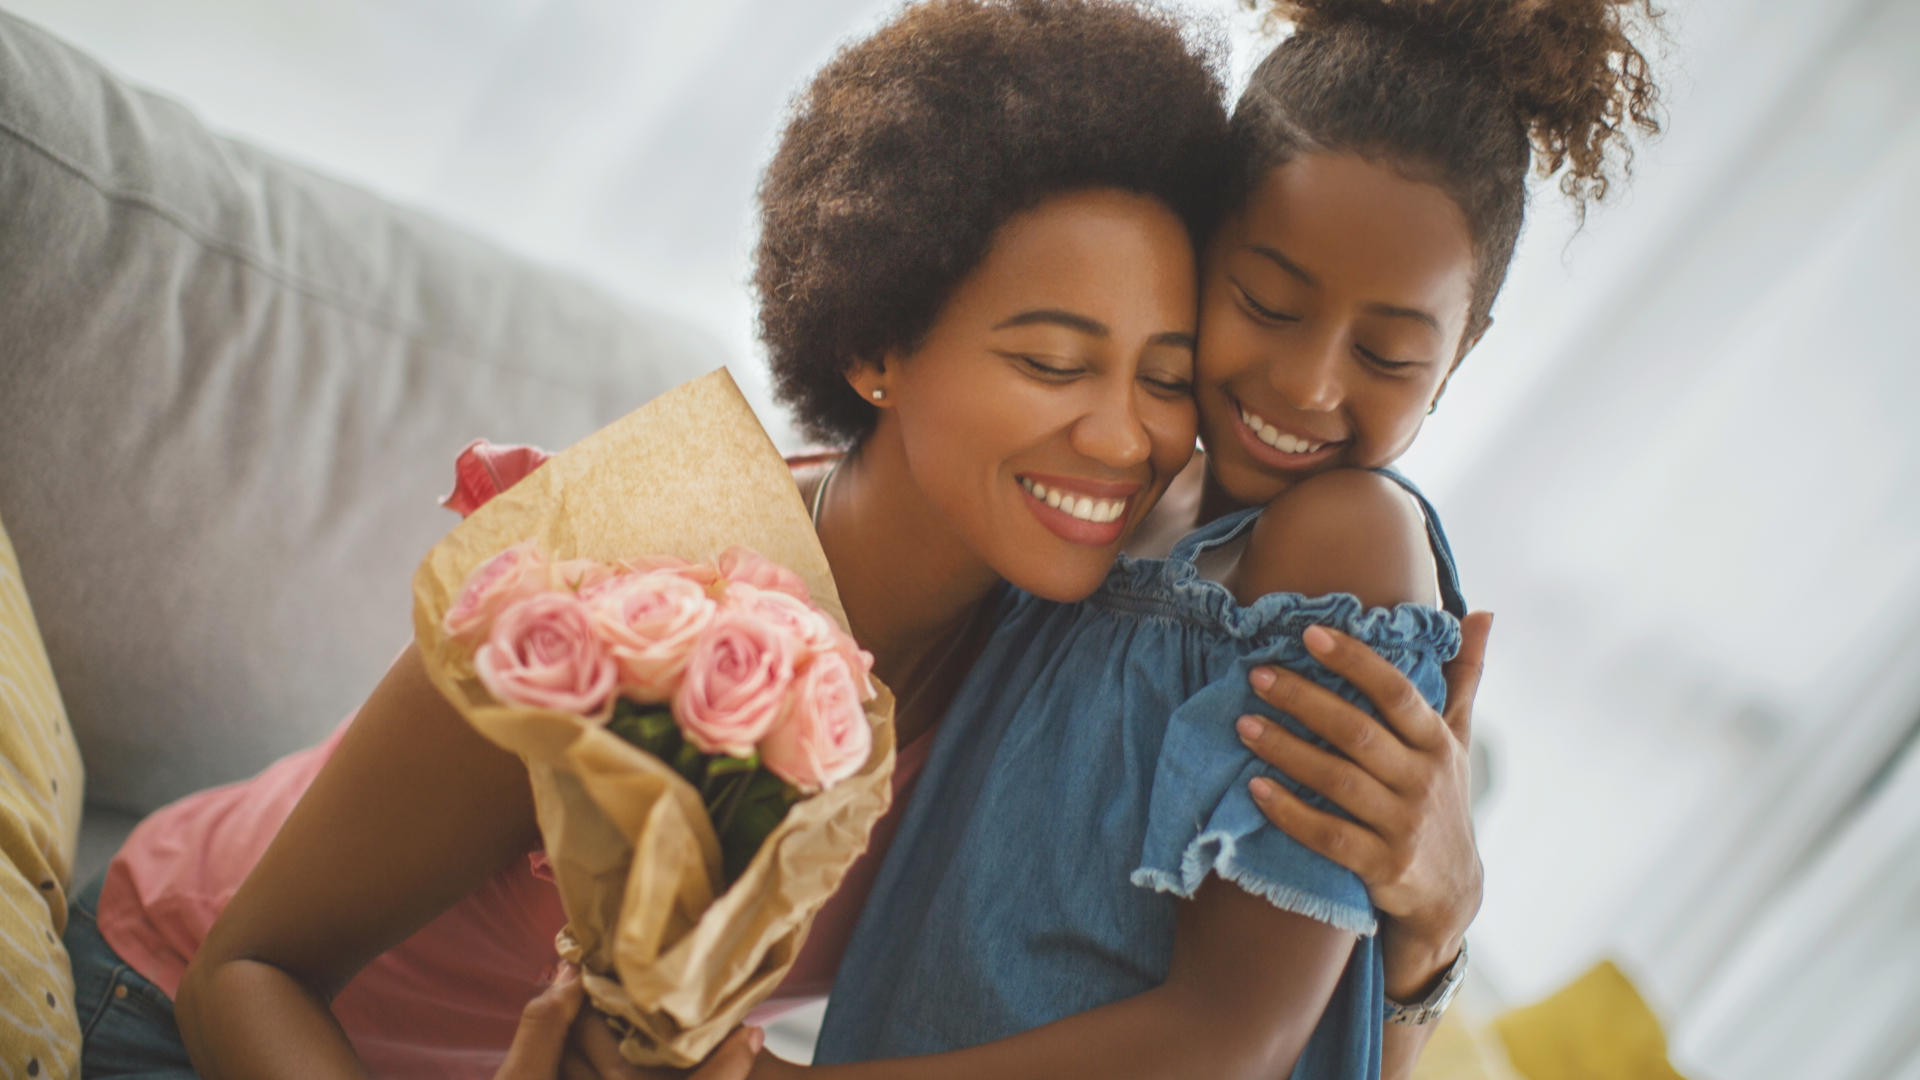 What To Get A Single Mom On Mother’s Day: The Only 5 Gifts That Matter